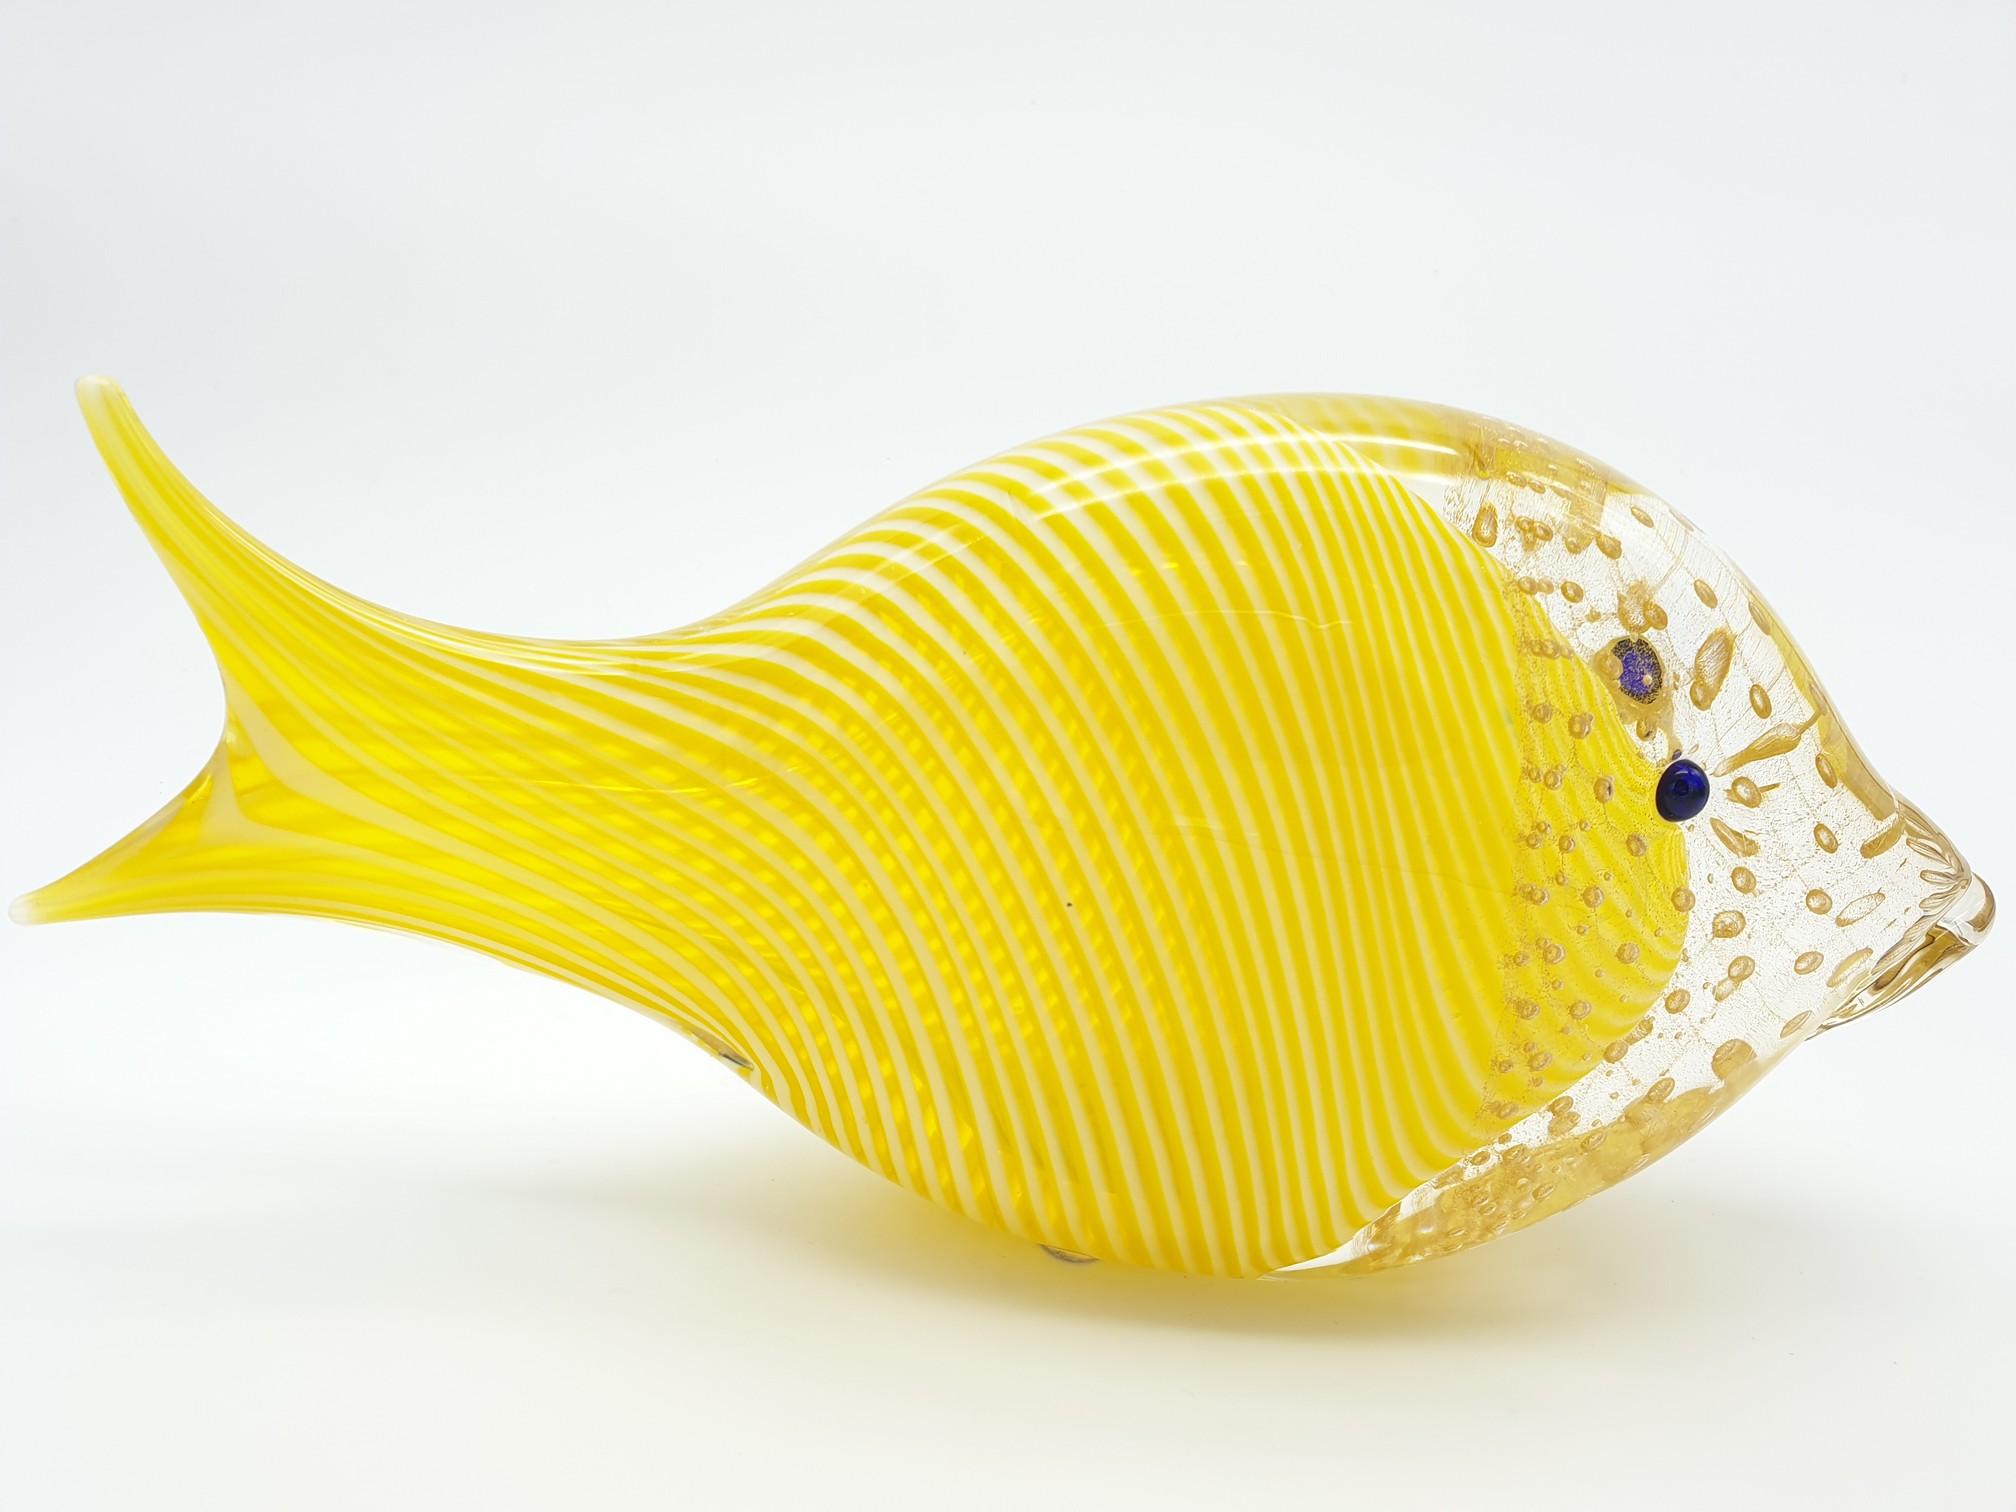 Modern Murano Glass Fish in Yellow & Gold Color with Bubbles by Cenedese, 1990s For Sale 1